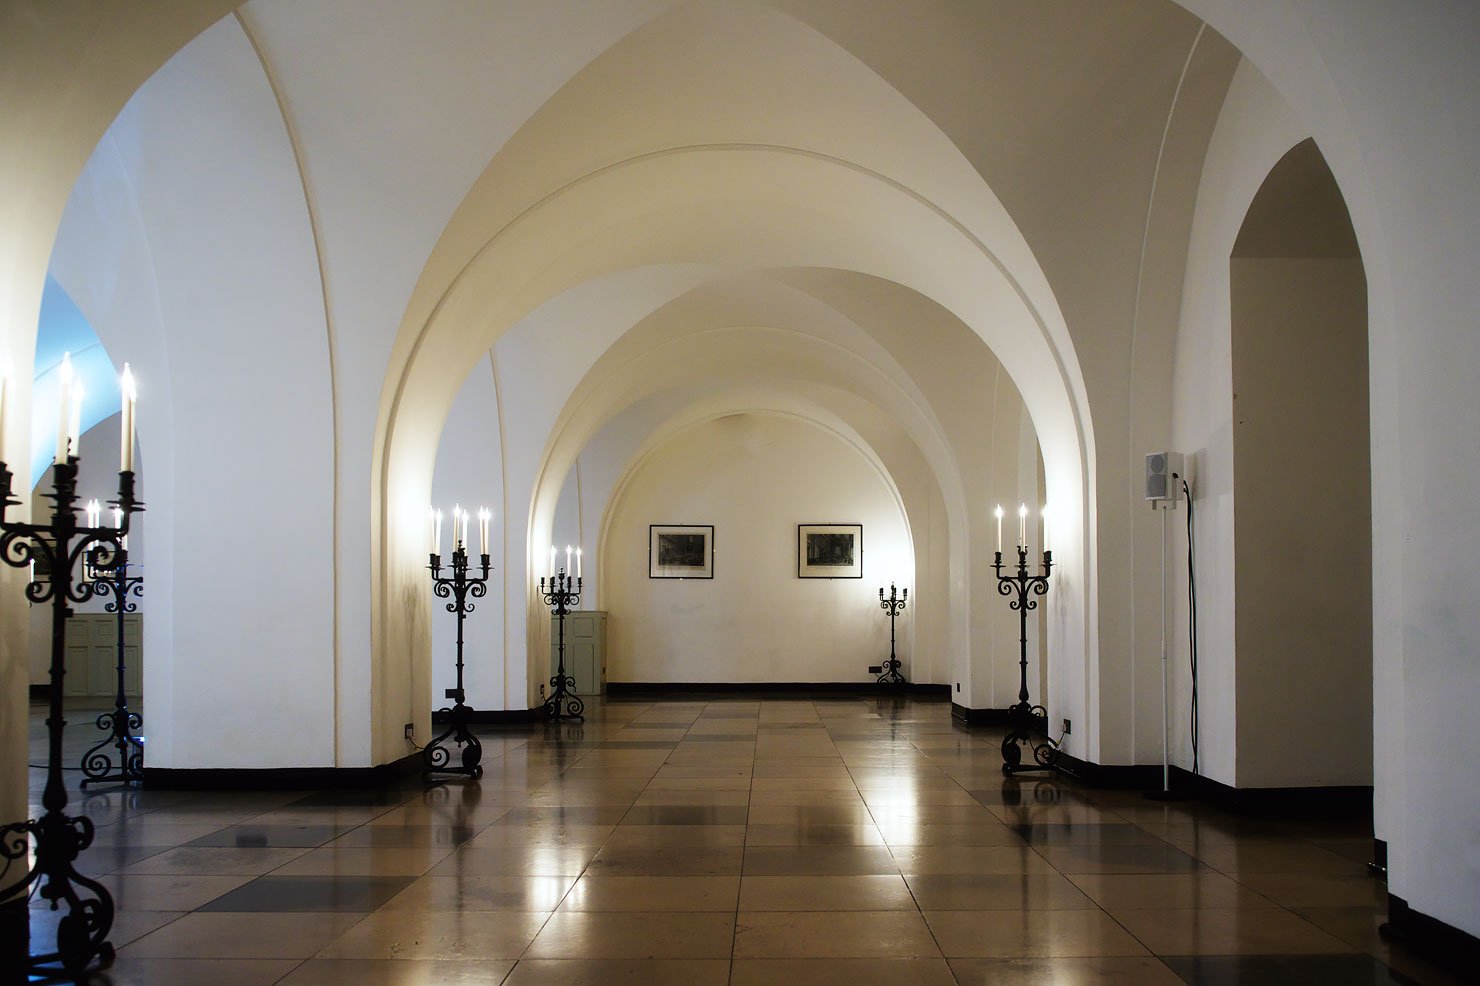 Banqueting-House-The Undercroft, London